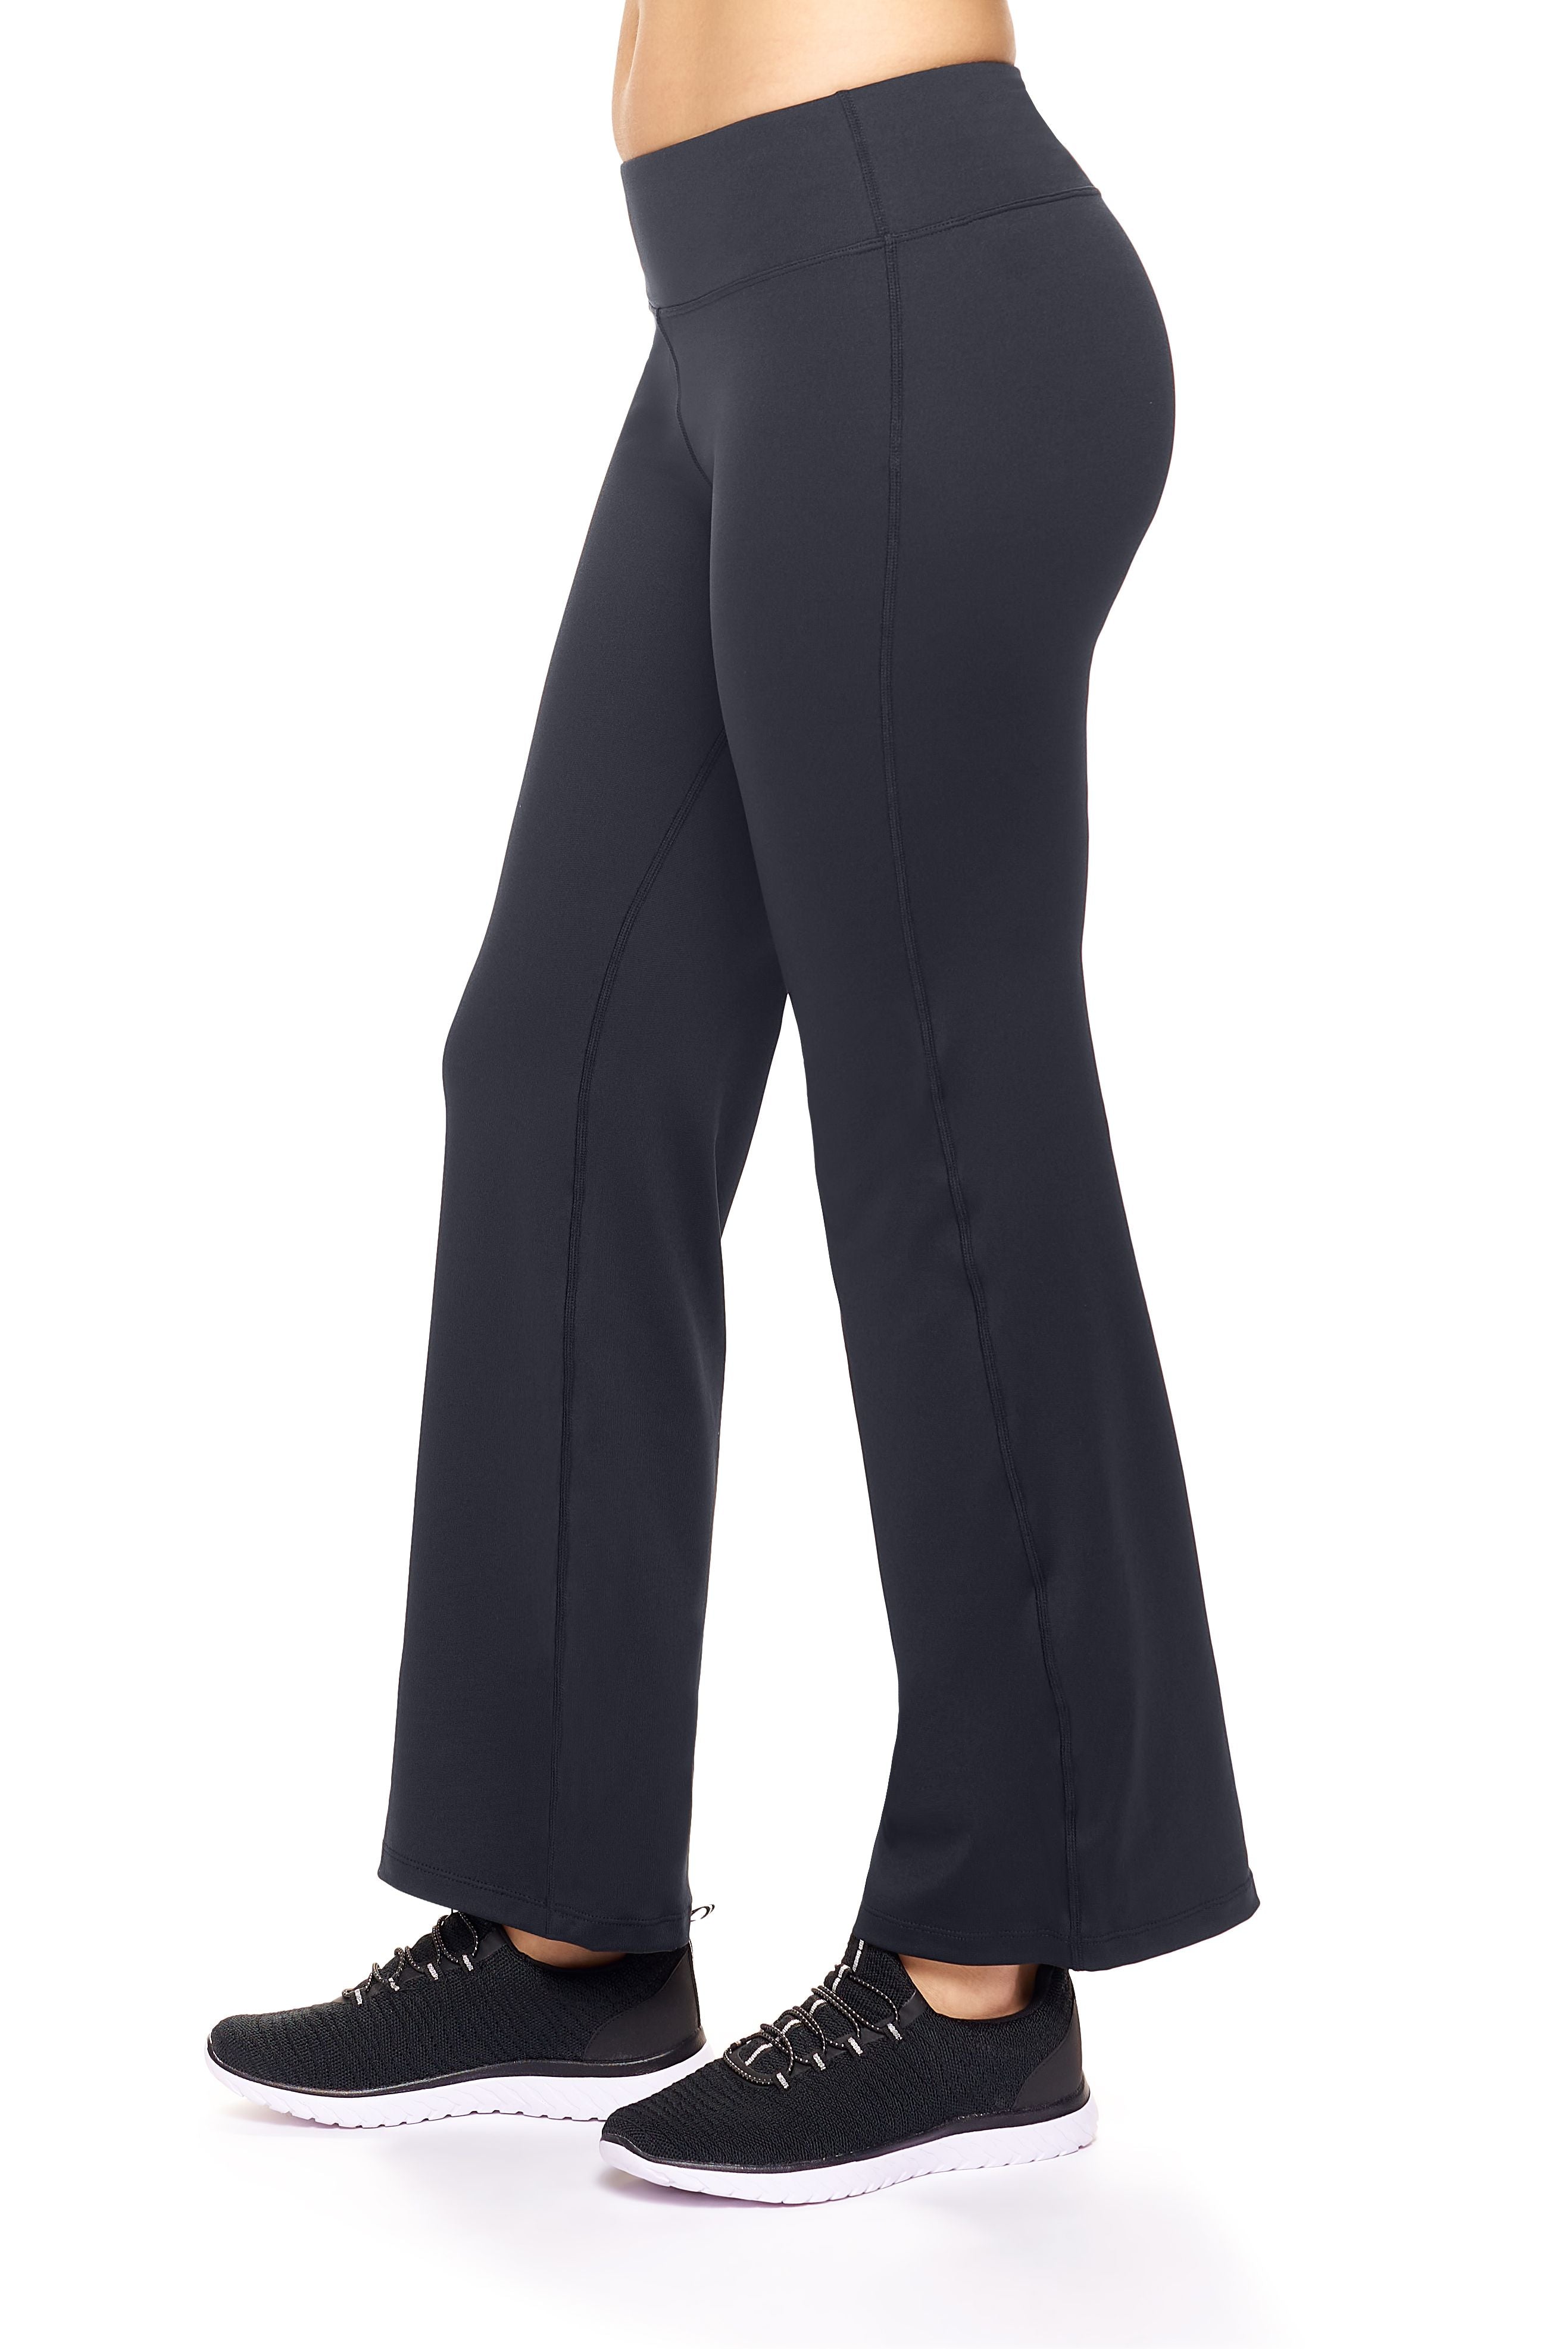 Most Flattering Bootcut Yoga Pantsuit  International Society of Precision  Agriculture